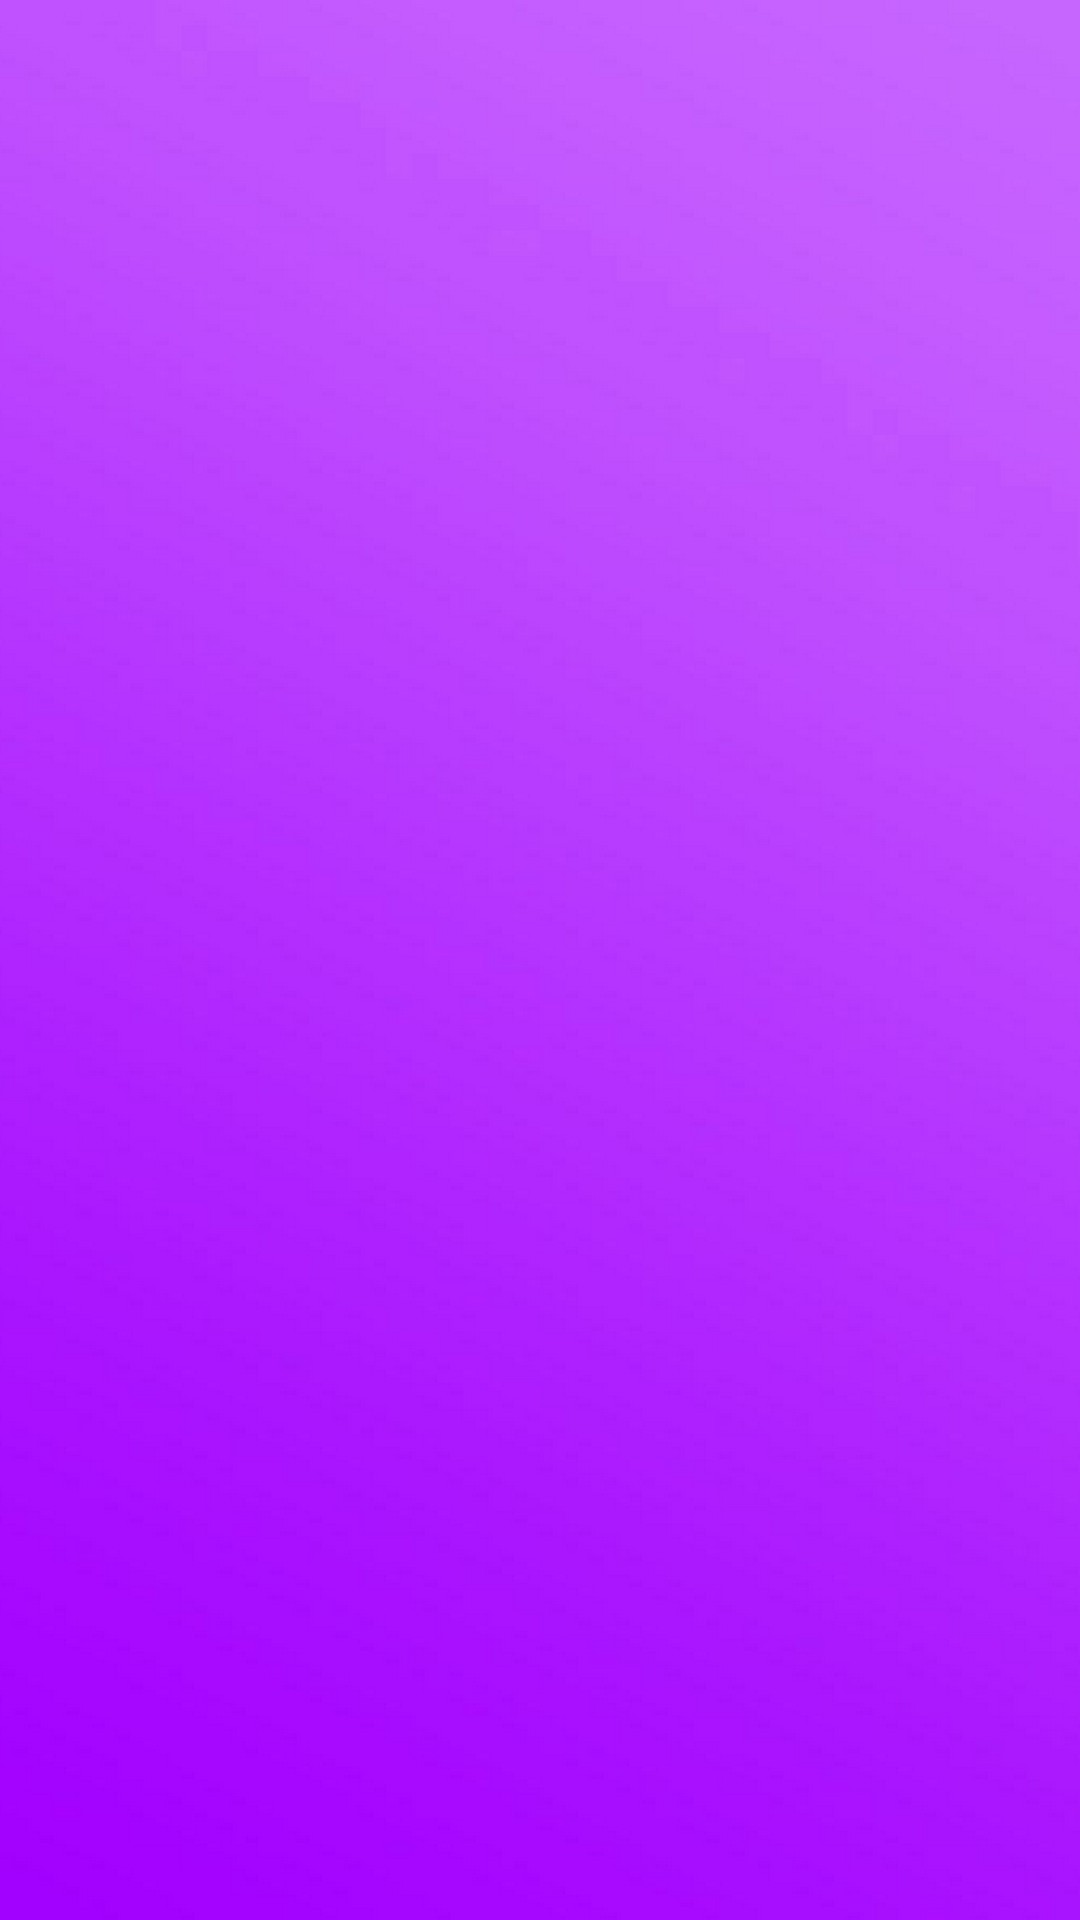 Neon Purple Wallpaper For Phone HD with high-resolution 1080x1920 pixel. Download all Mobile Wallpapers and Use them as wallpapers for your iPhone, Tablet, iPad, Android and other mobile devices